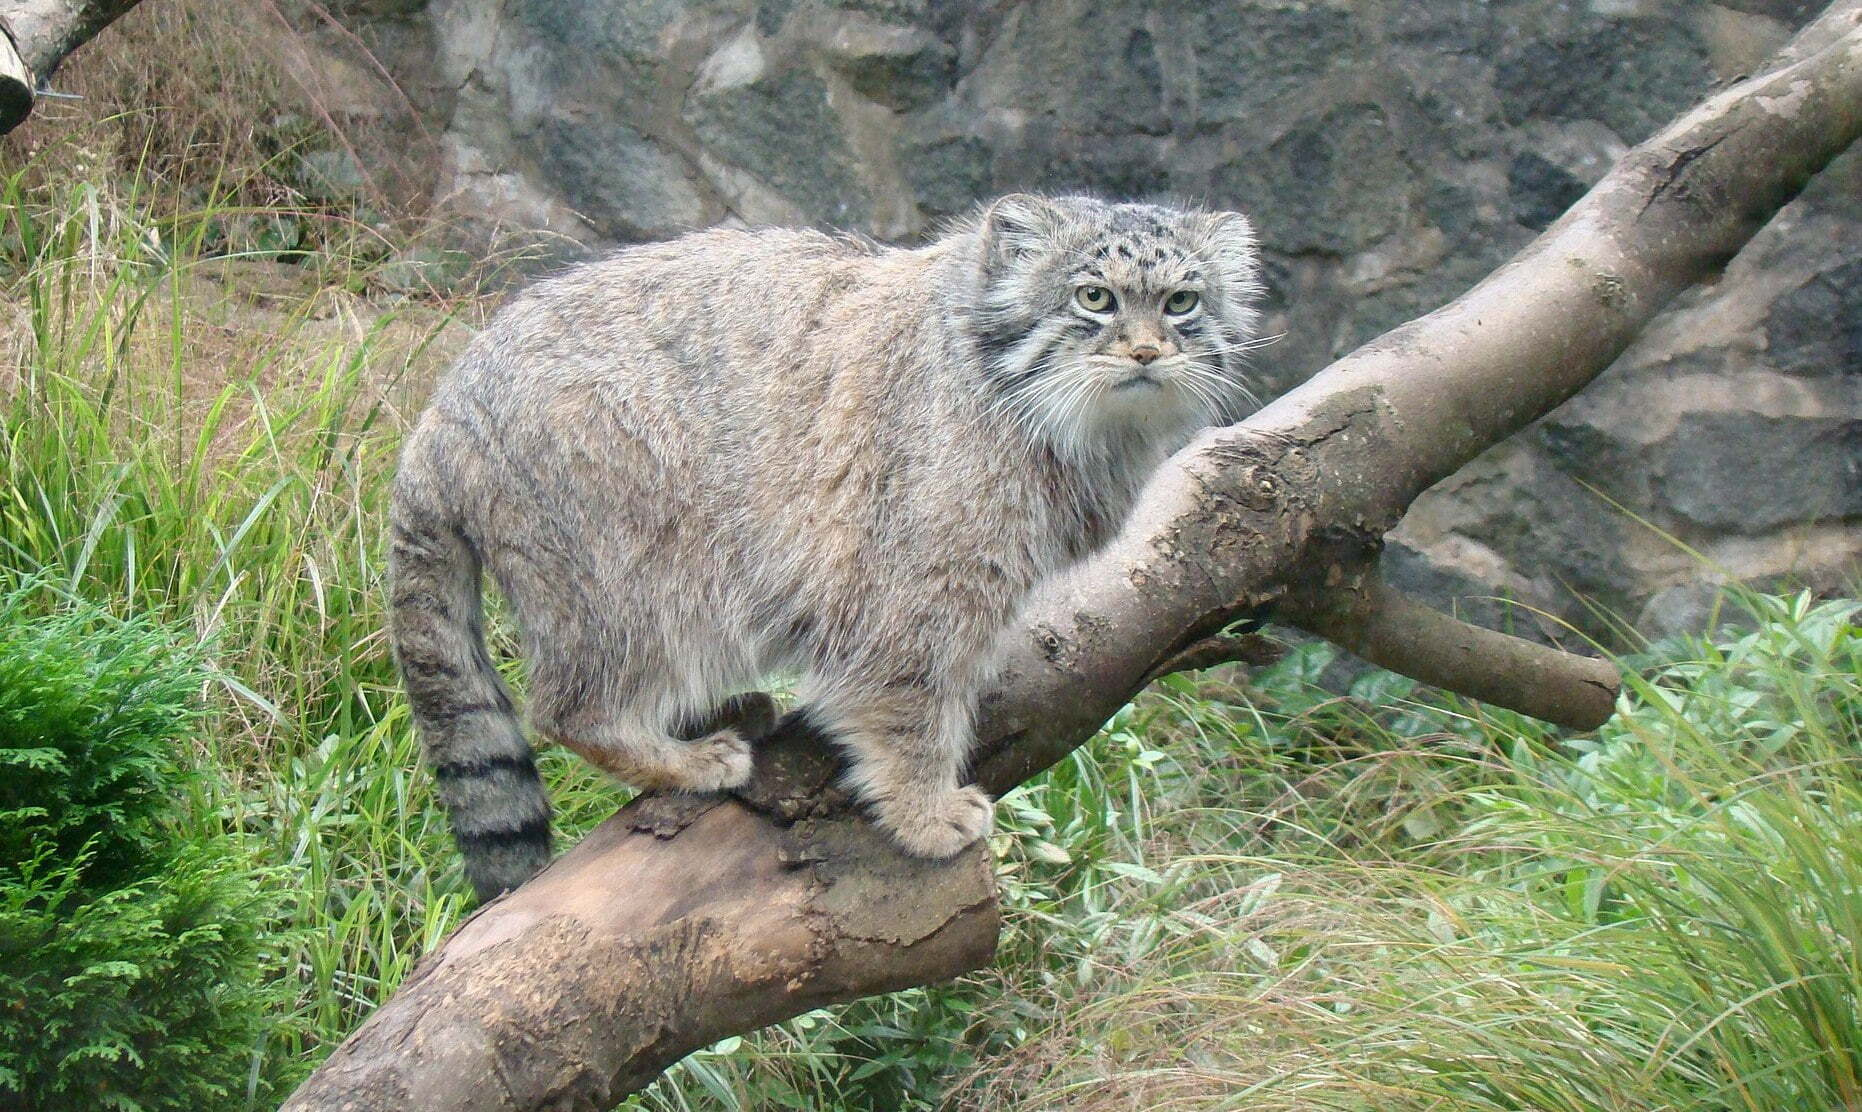 Grumpy-looking Pallas cats were recently found on Everest.